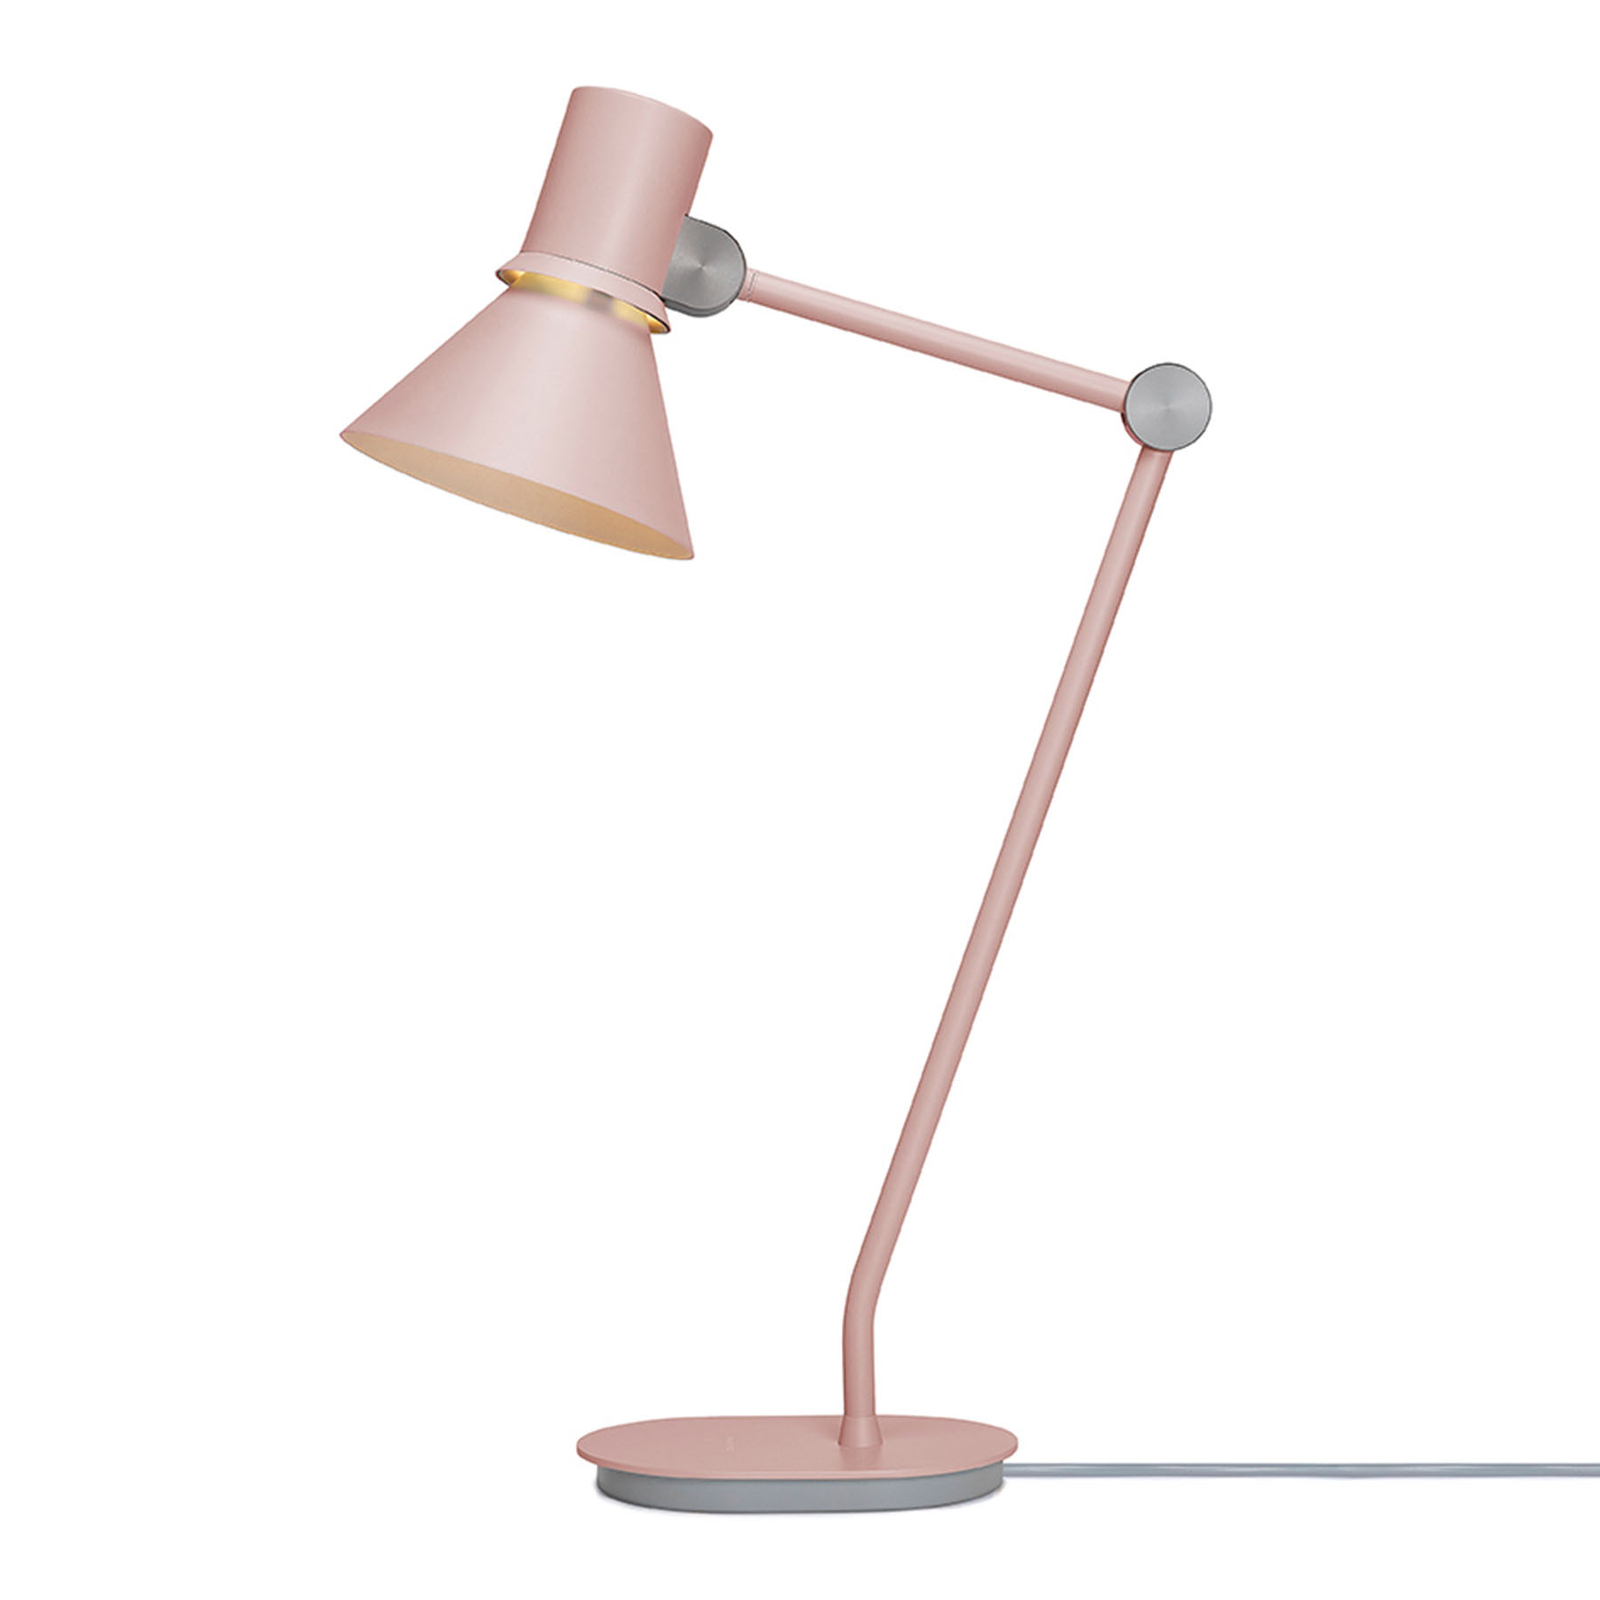 Anglepoise Type 80 table lamp, pink